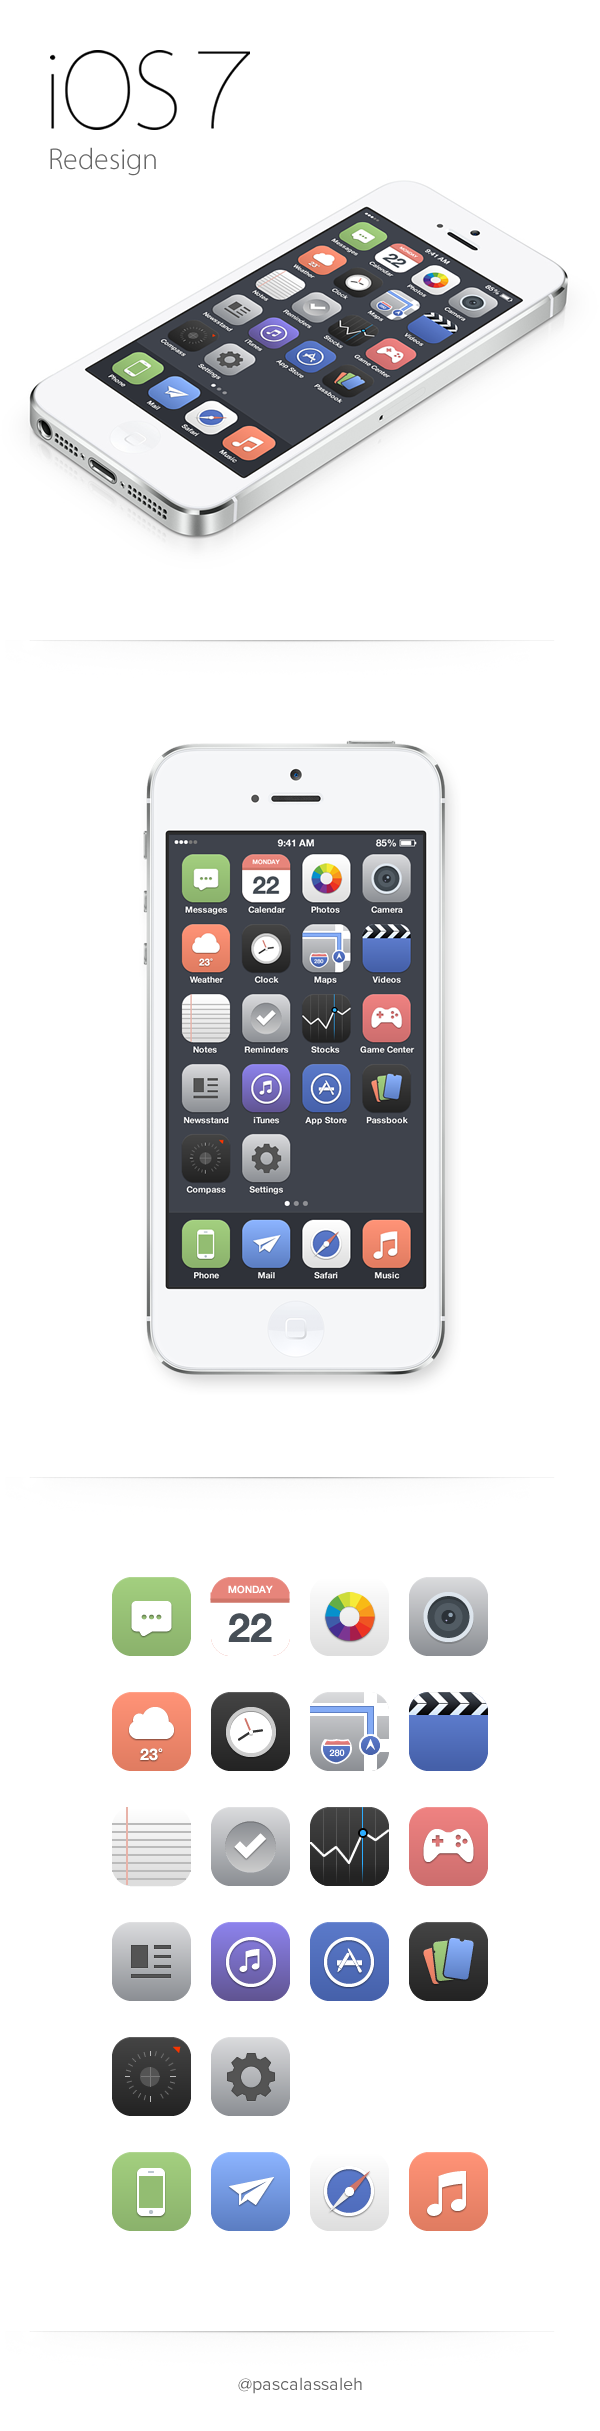 simple redesign ipod mobile fresh flat Firmware beta android ios7 iphone Icon ios design